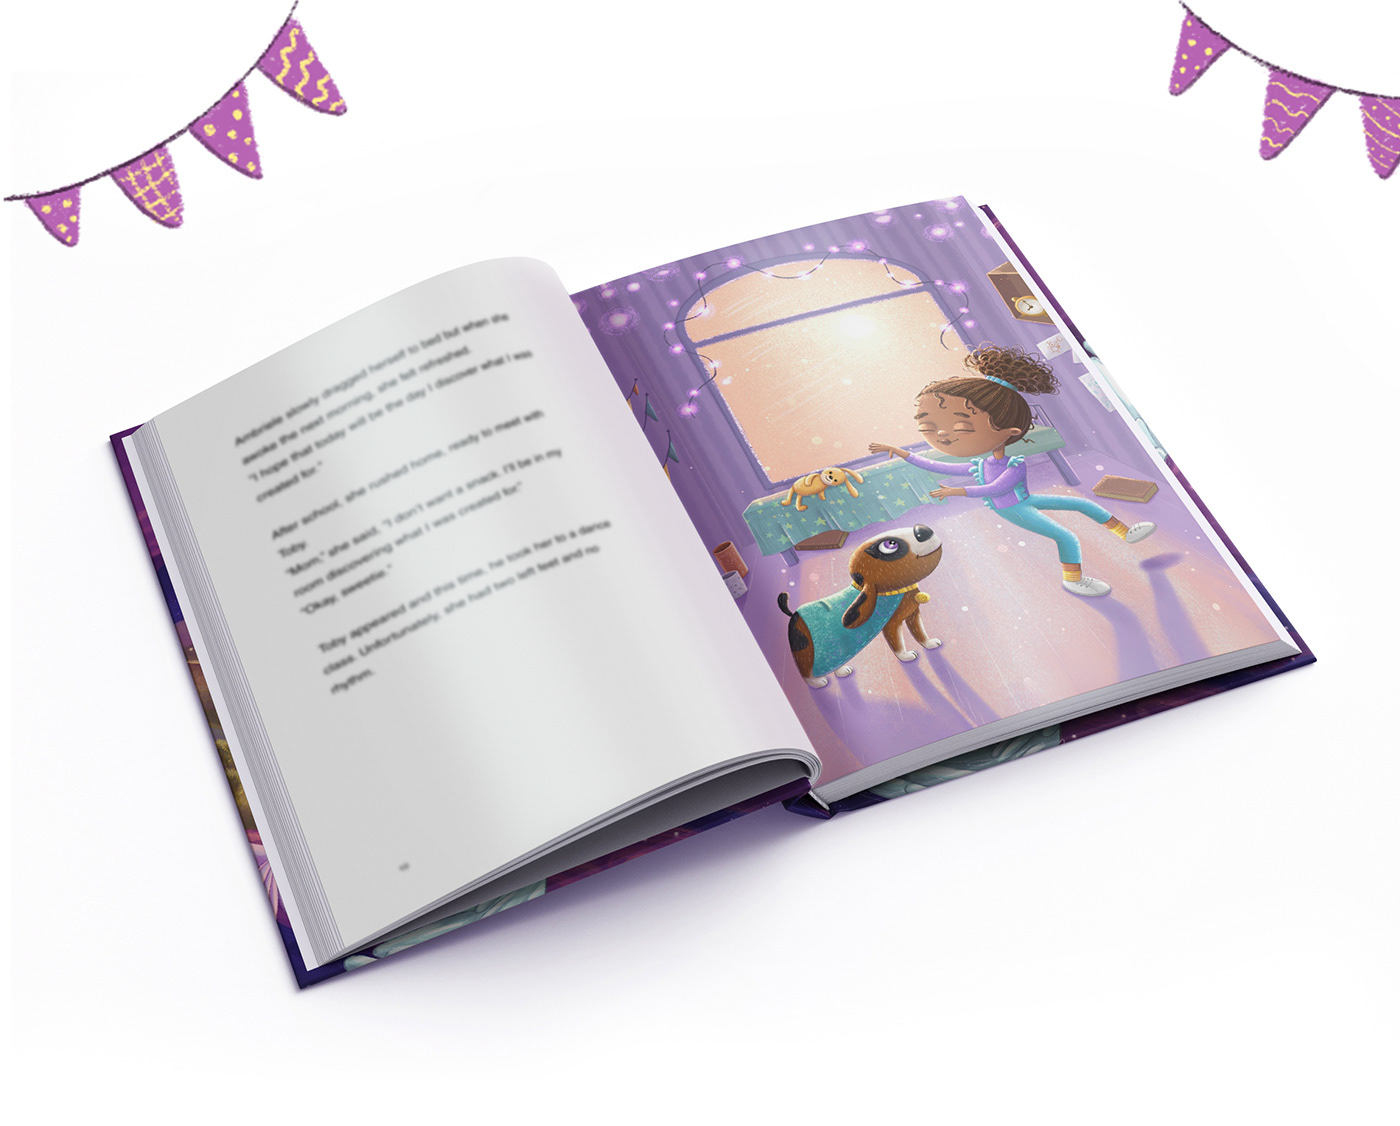 book for children book illustration Character Book Character design  children's book childrens book childrens illustration kidlit kids illustration Picture book